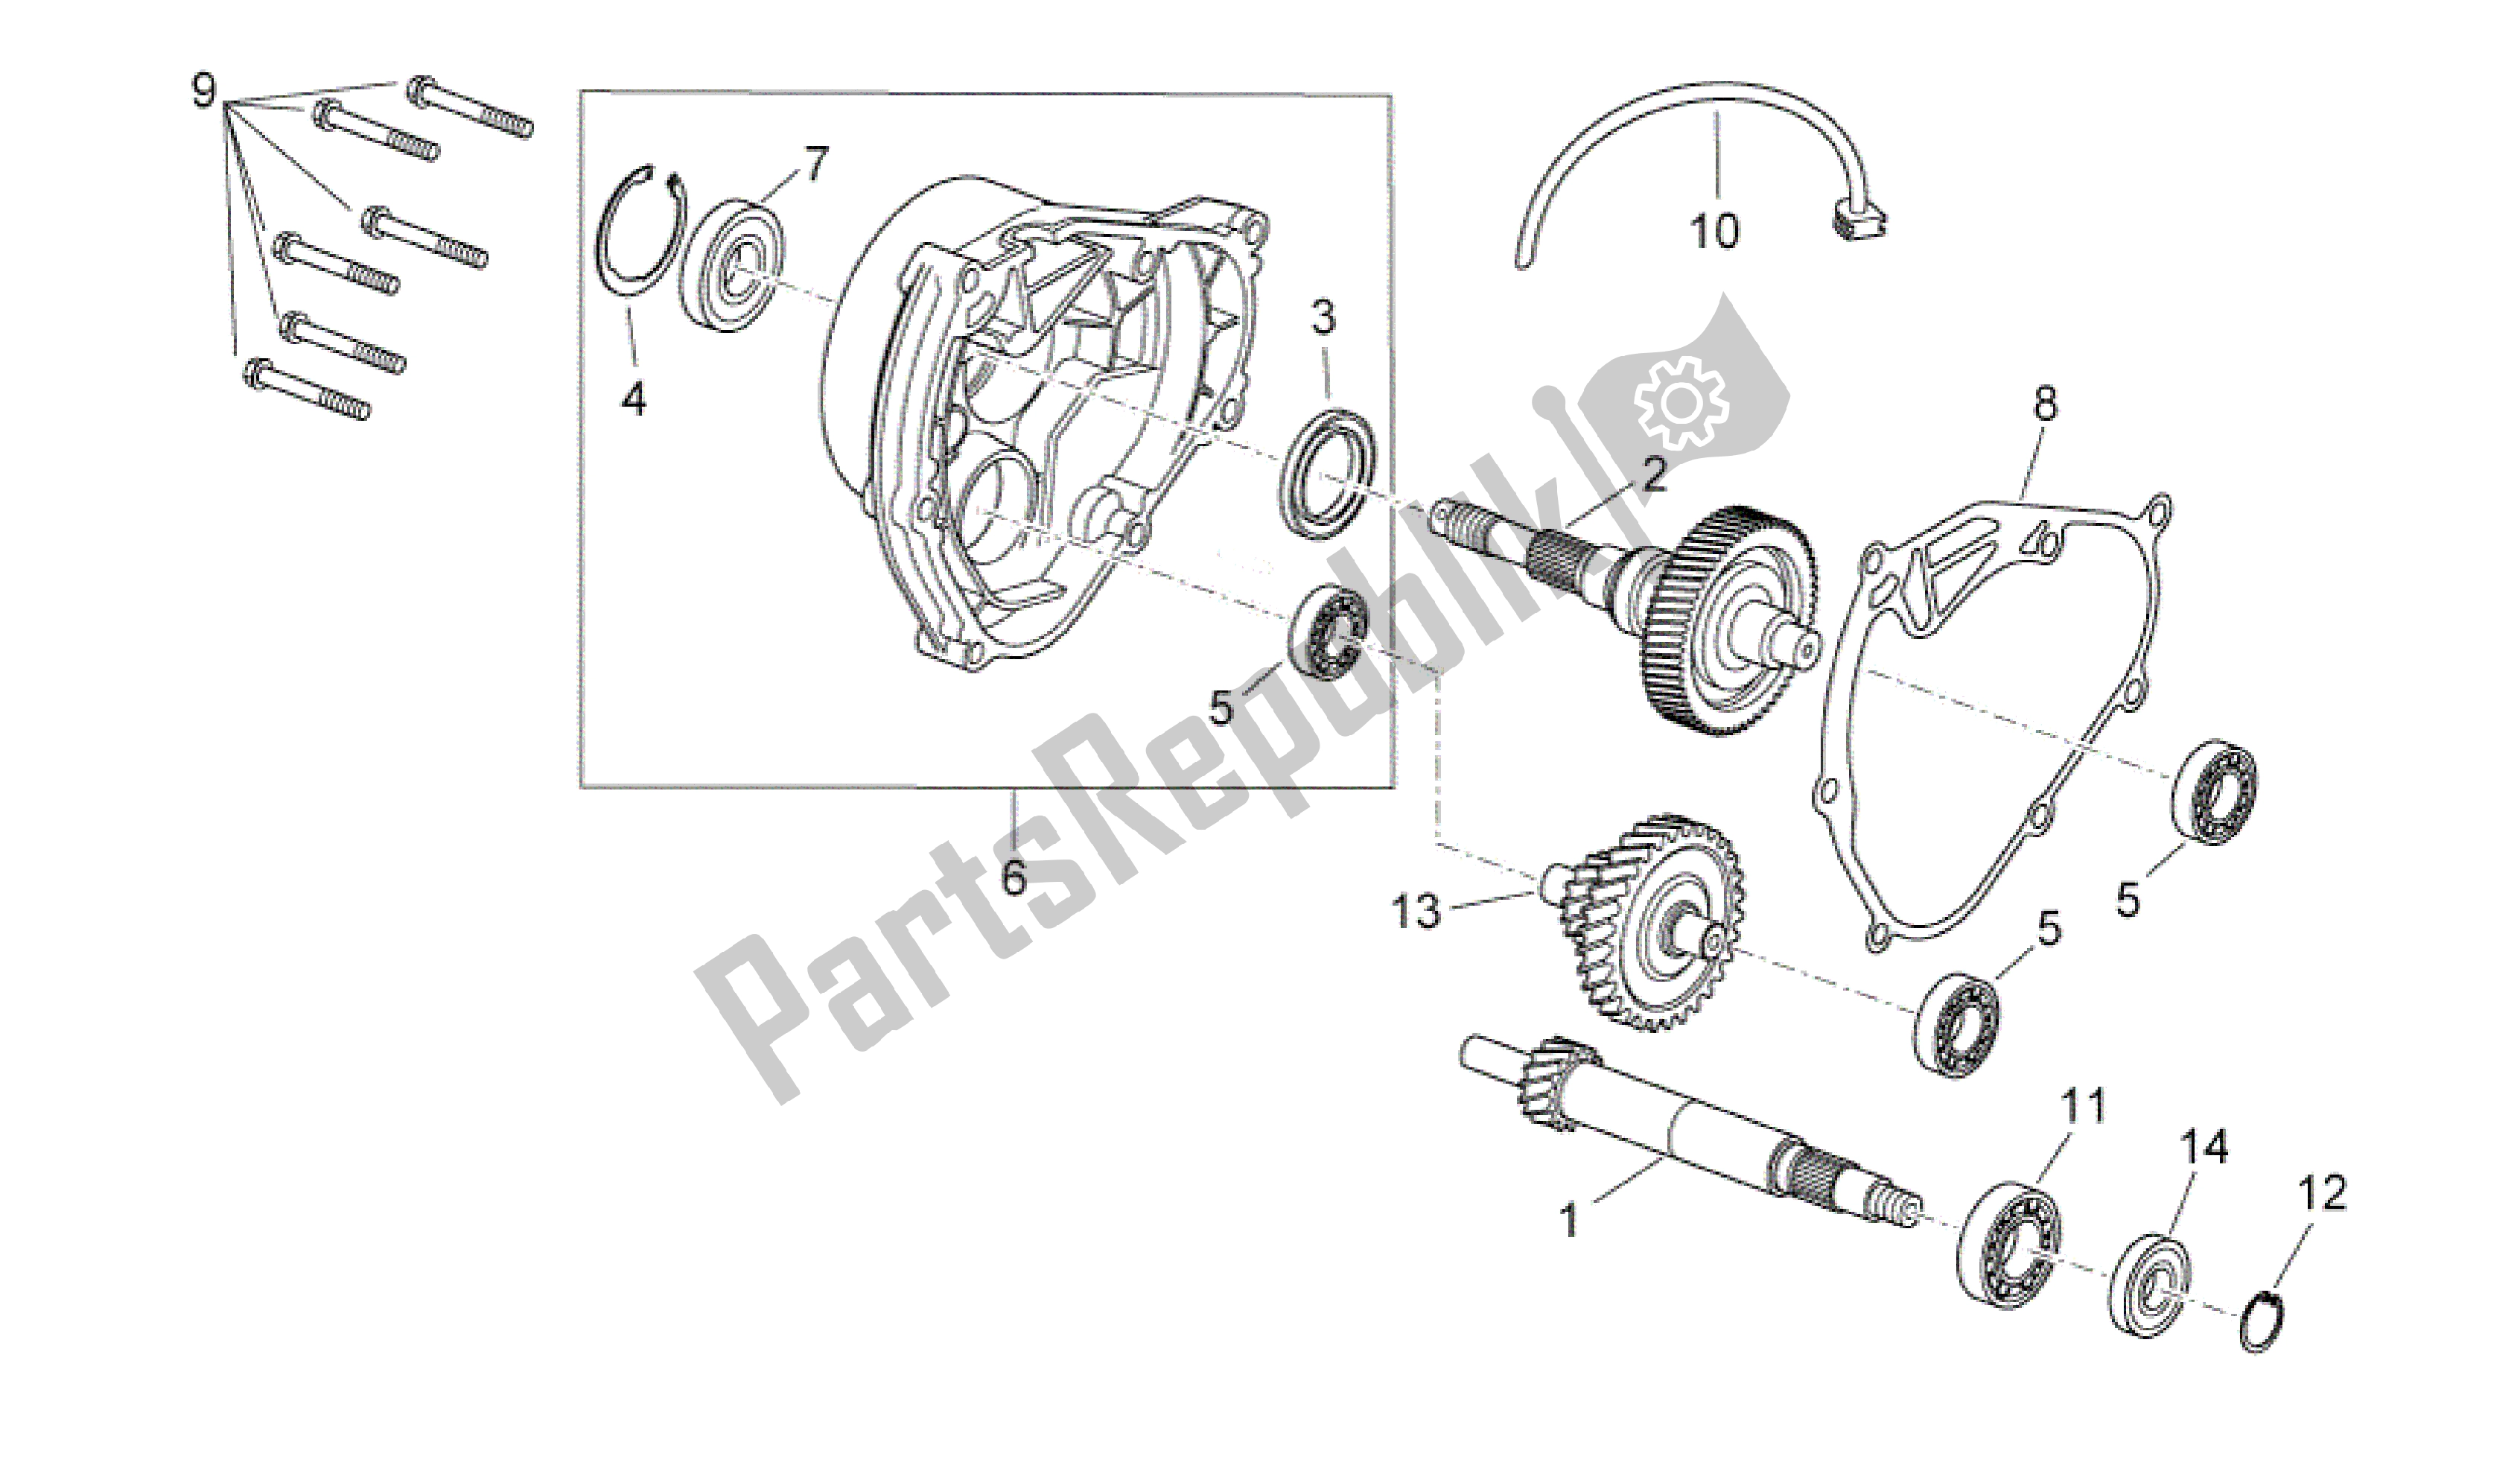 All parts for the Transmission of the Aprilia Sport City 300 2008 - 2010